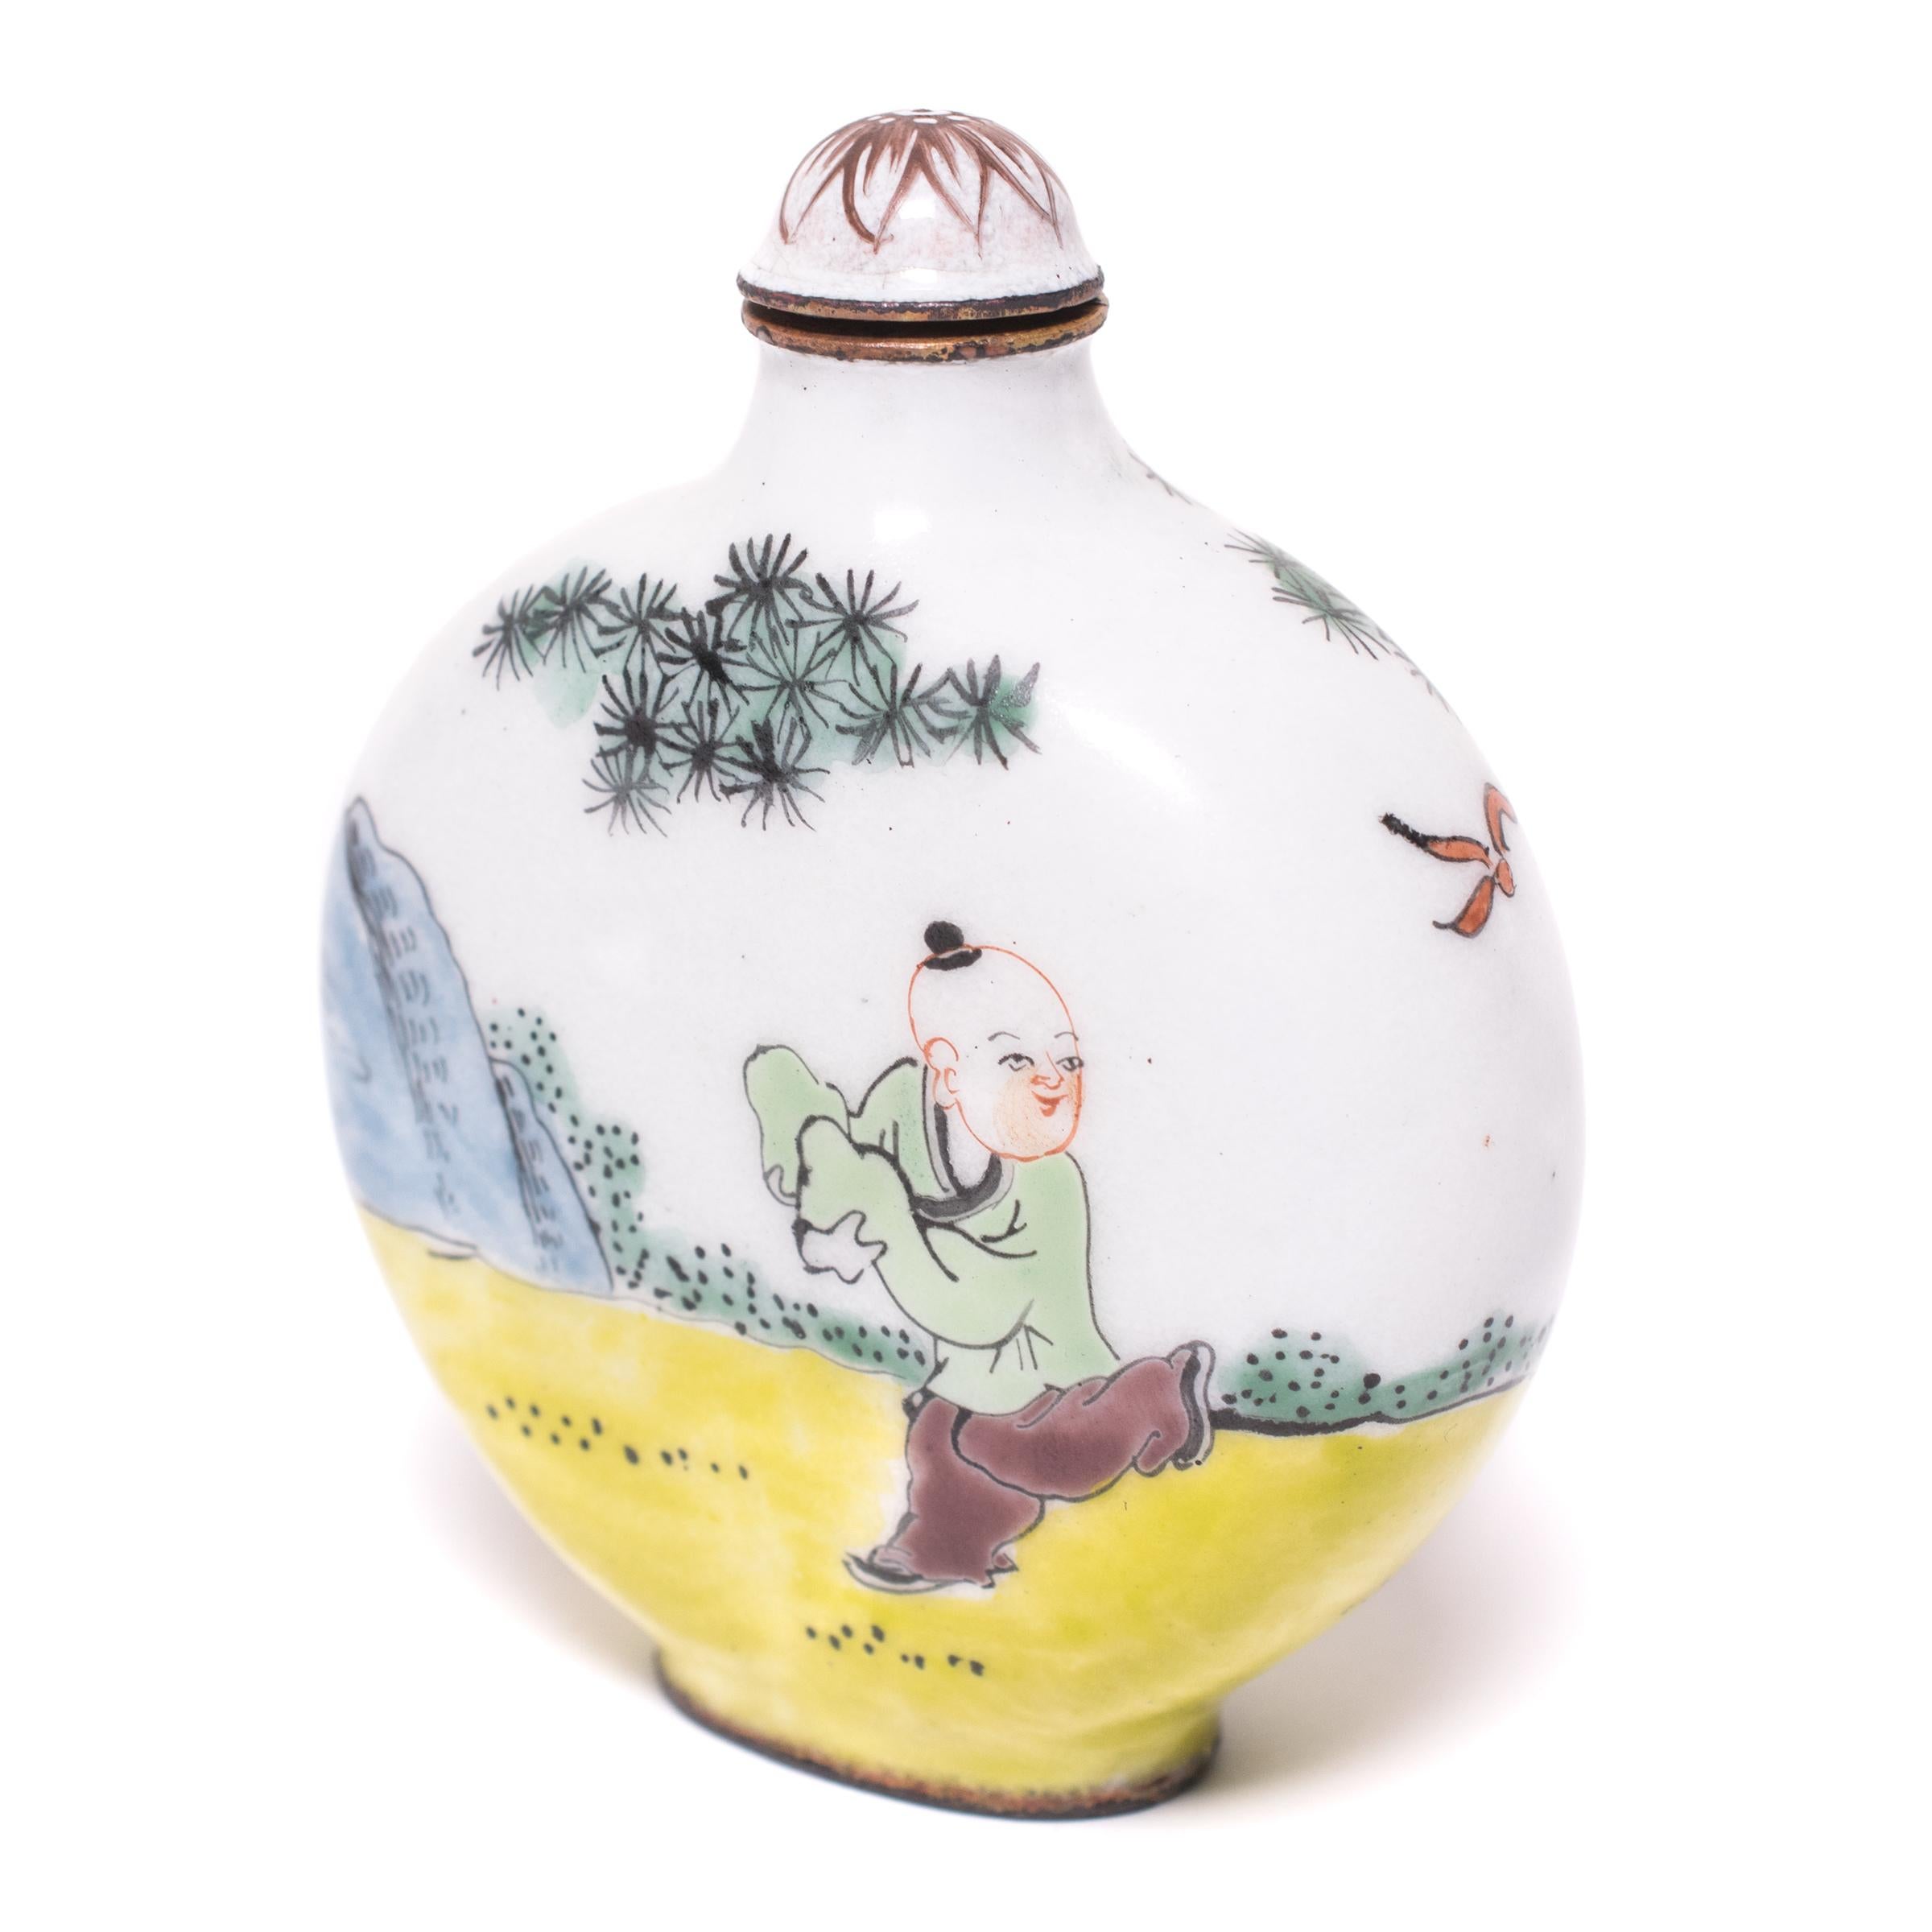 Qing Chinese Enameled Copper Snuff Bottle with Boys Playing